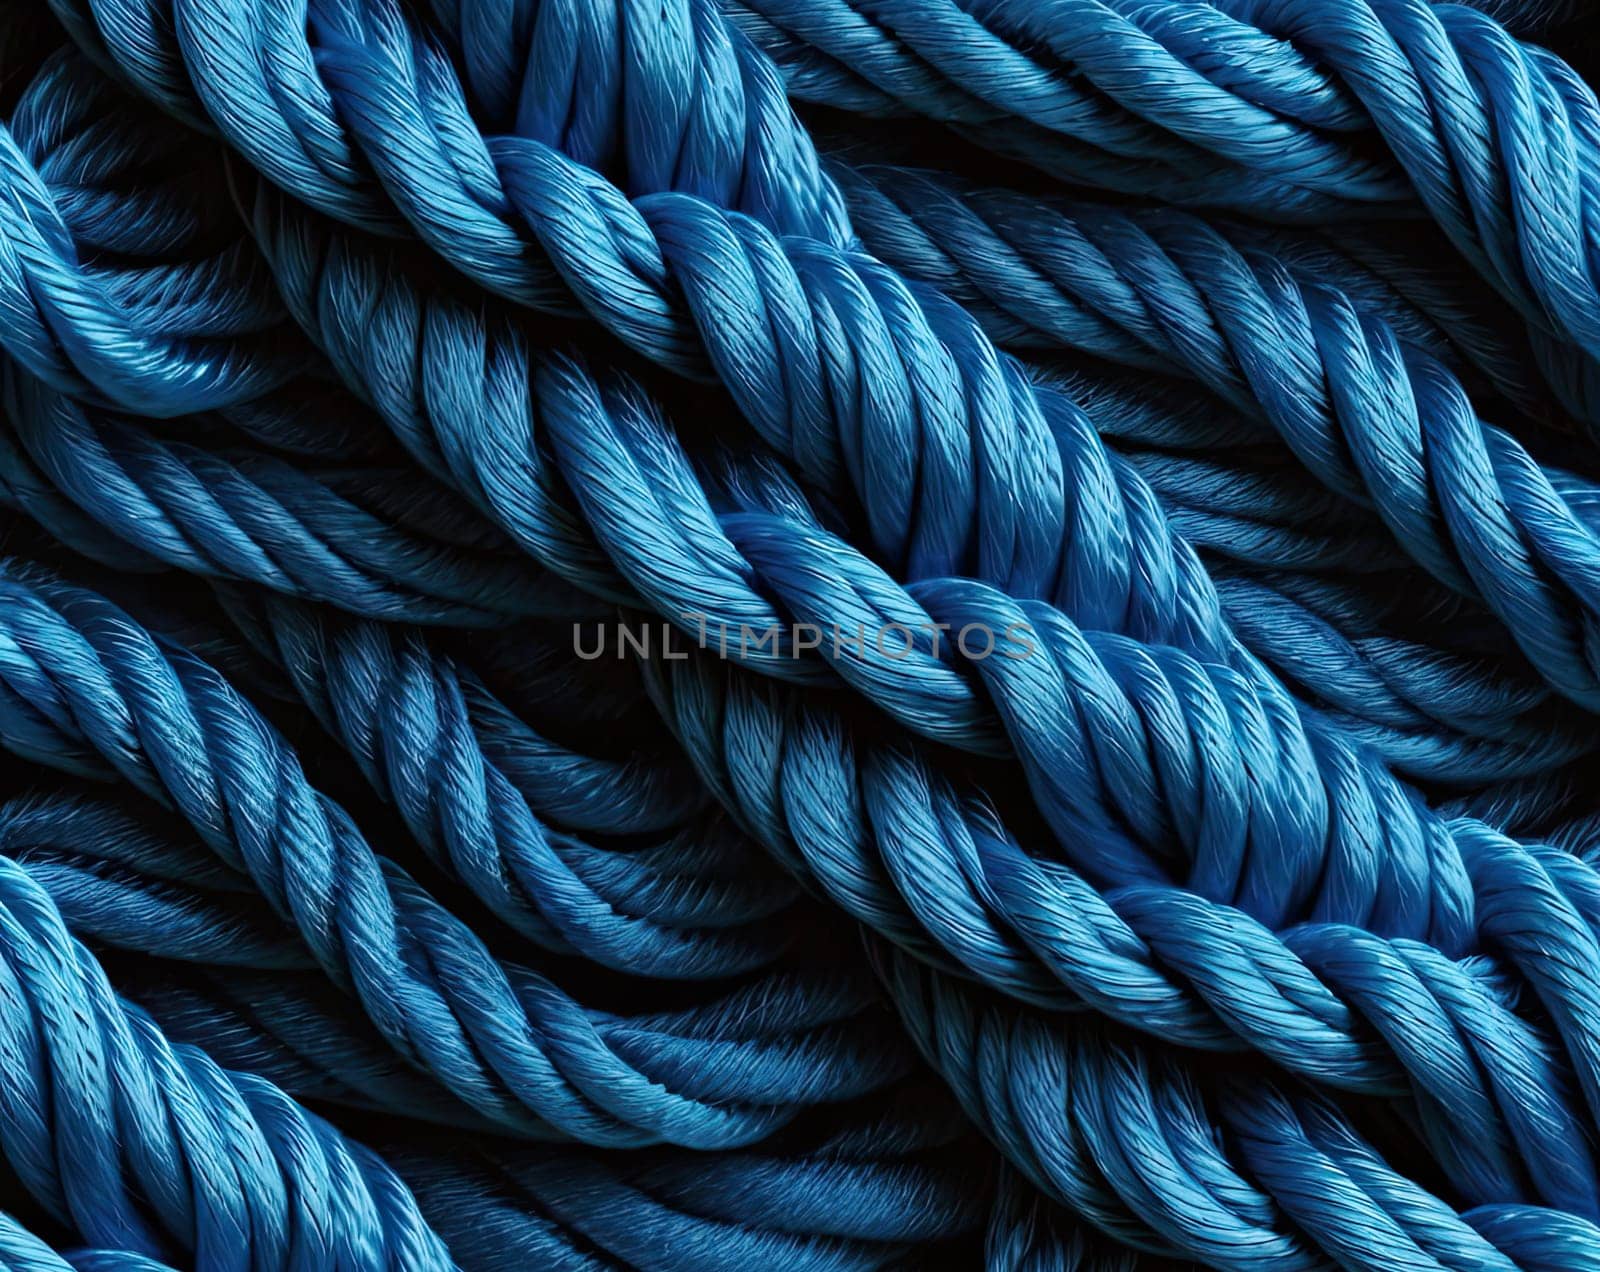  blue knitted texture close up. Colorful climbing rope.